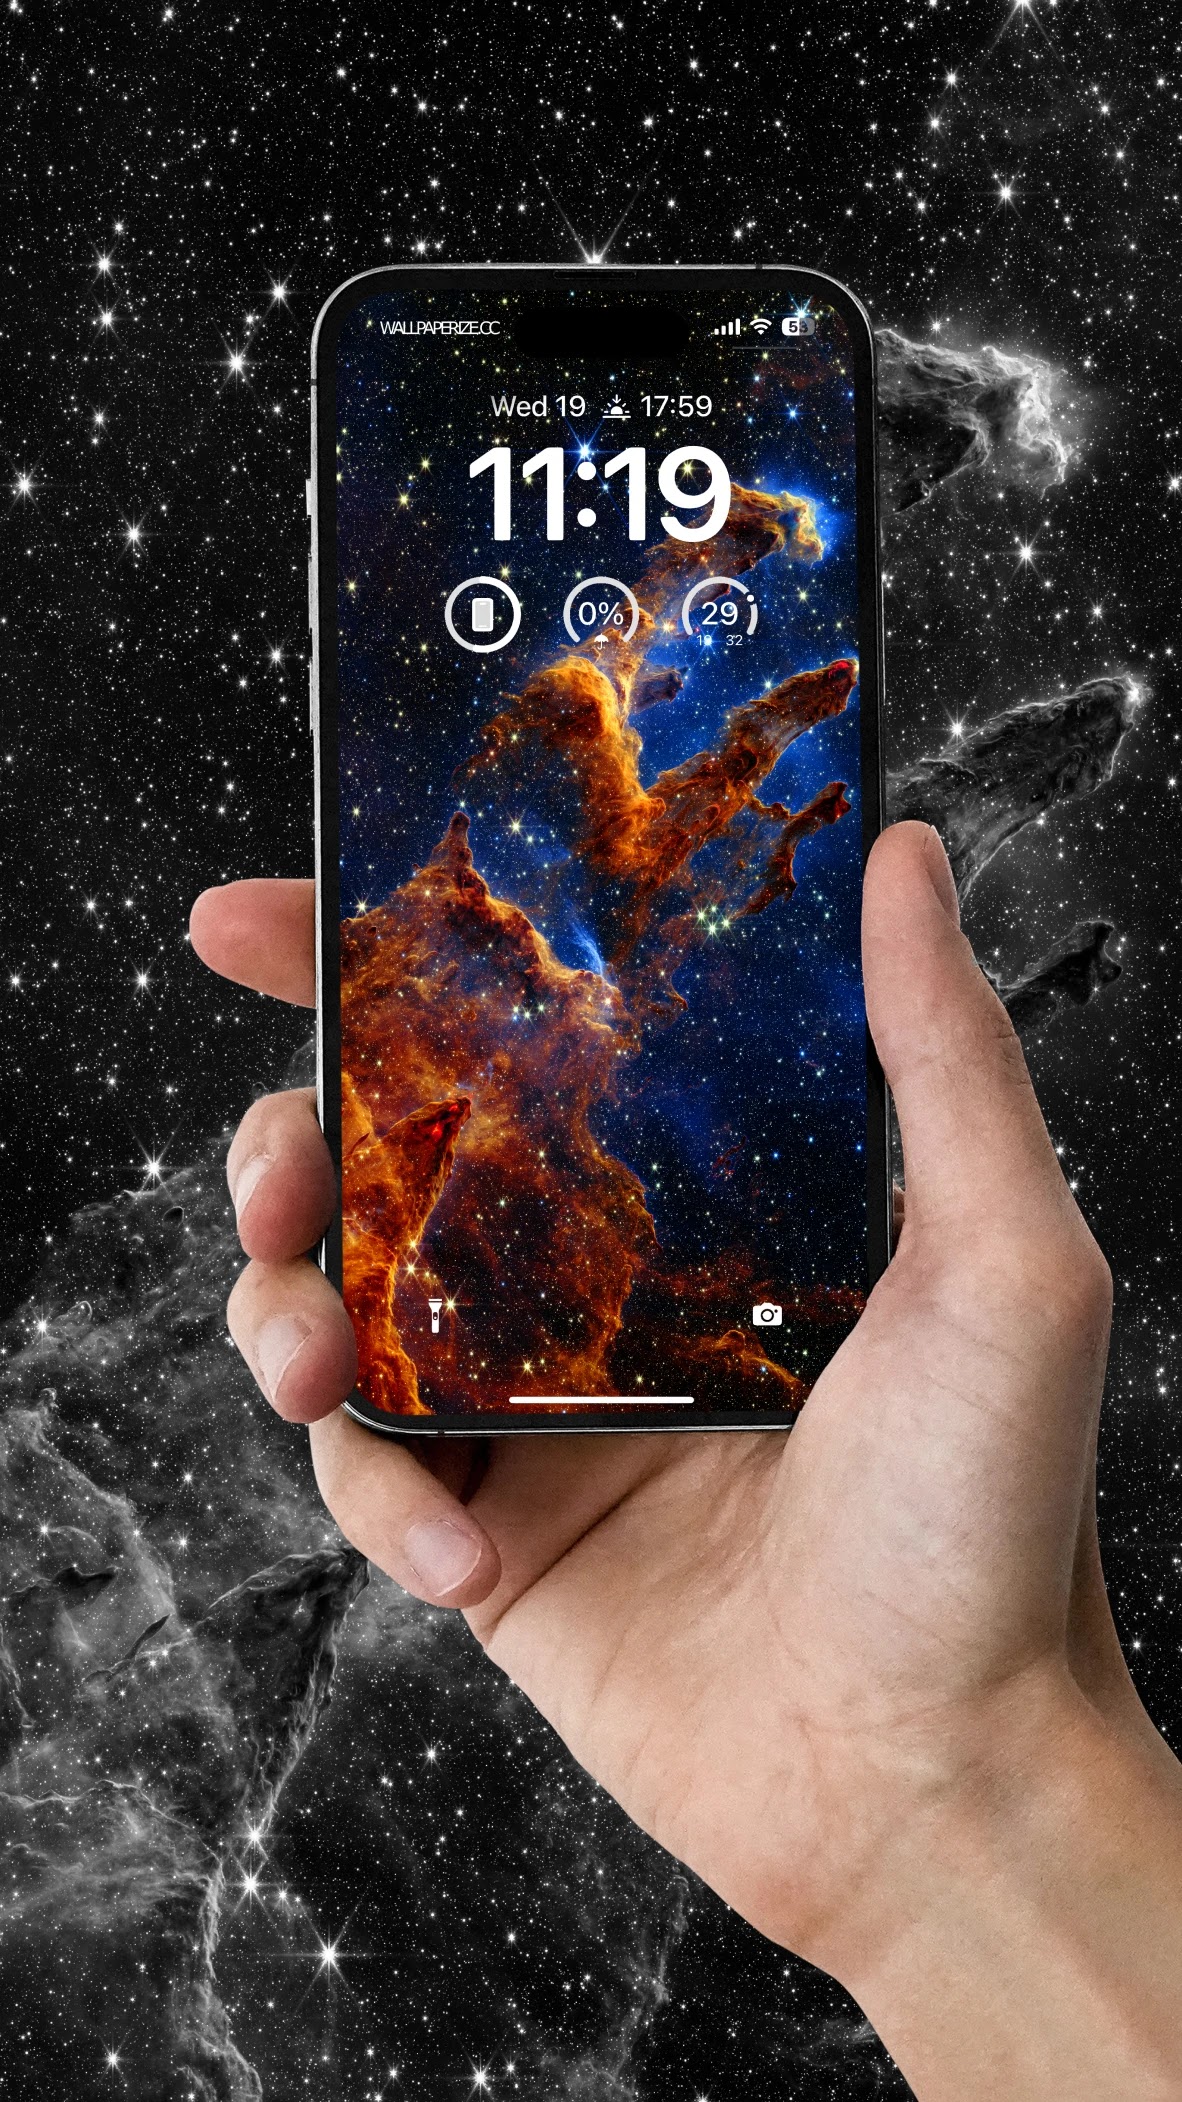 Pillars of Creation is a photograph taken by the Hubble Space Telescope wallpaper 4k for phone